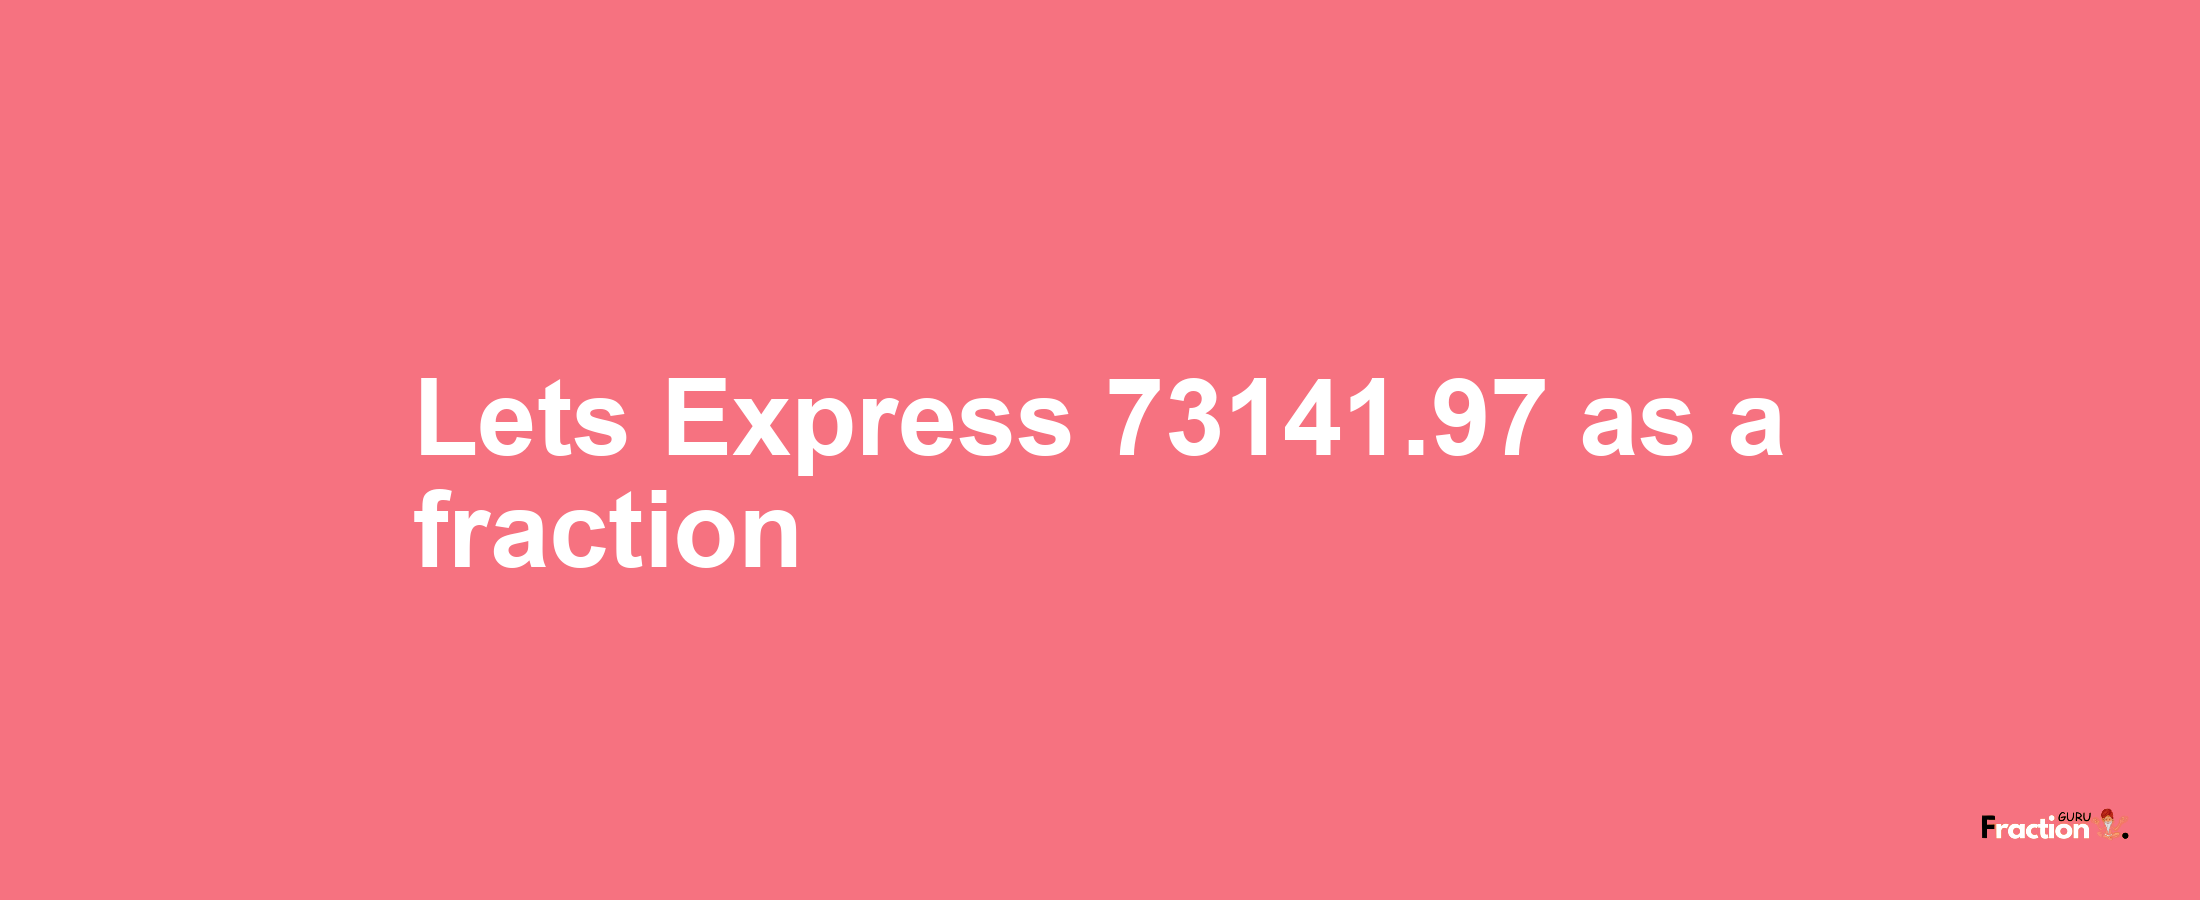 Lets Express 73141.97 as afraction